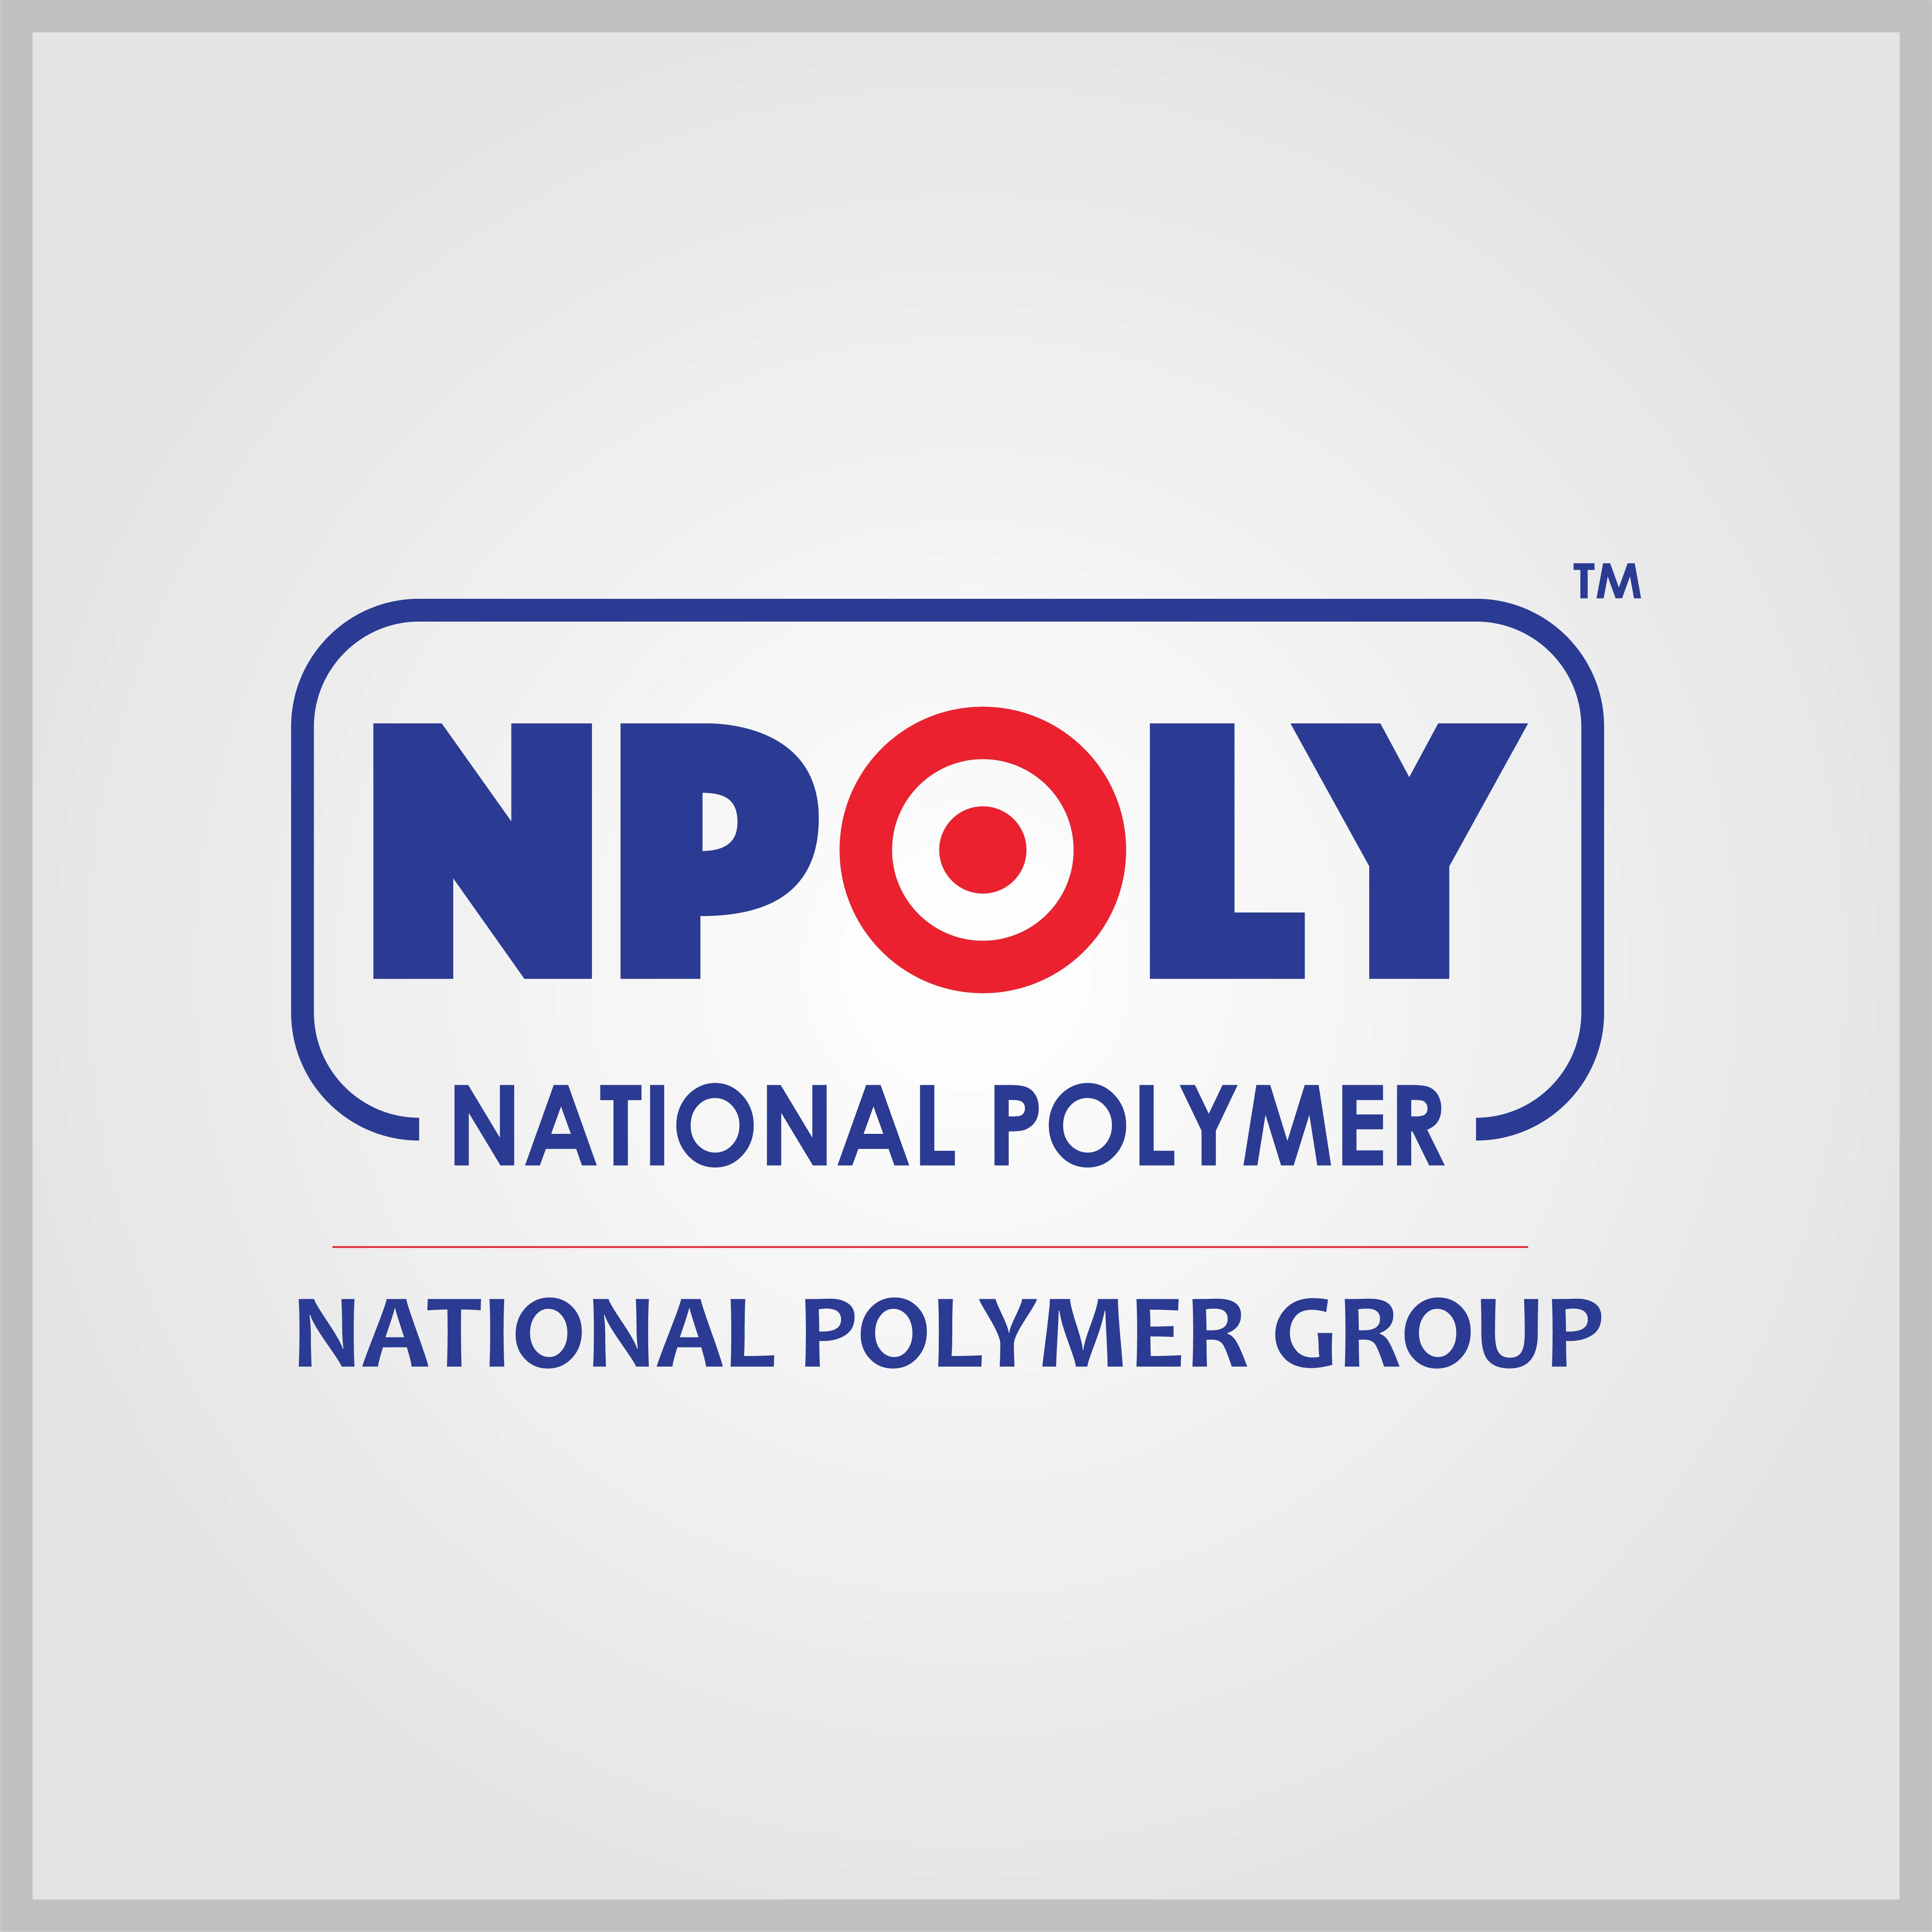 NPoly